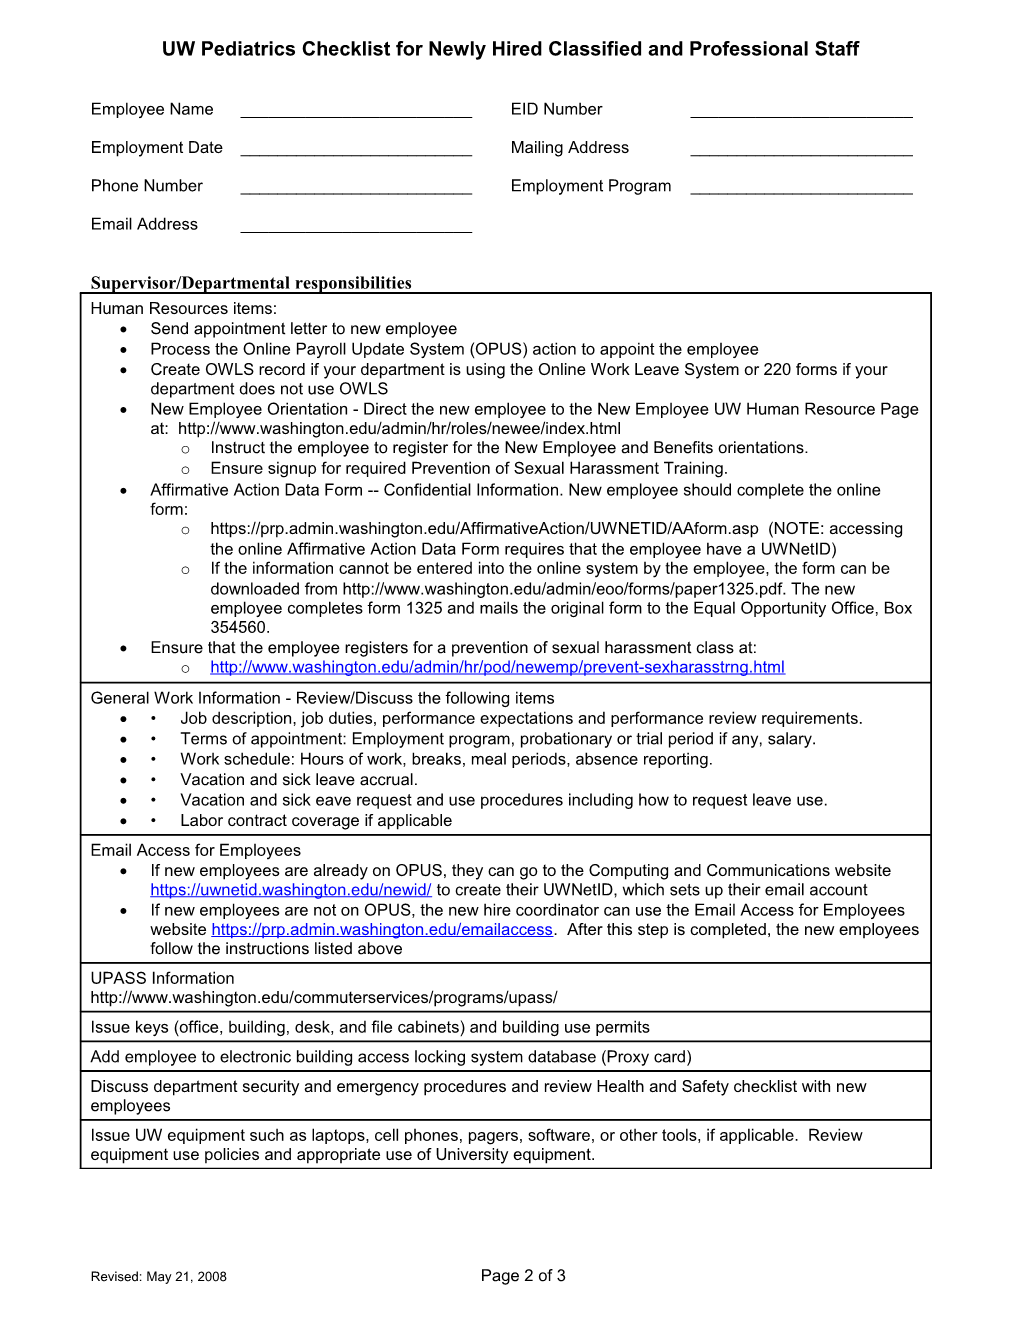 UW Pediatrics Checklist for Newly Hired Classified and Professional Staff